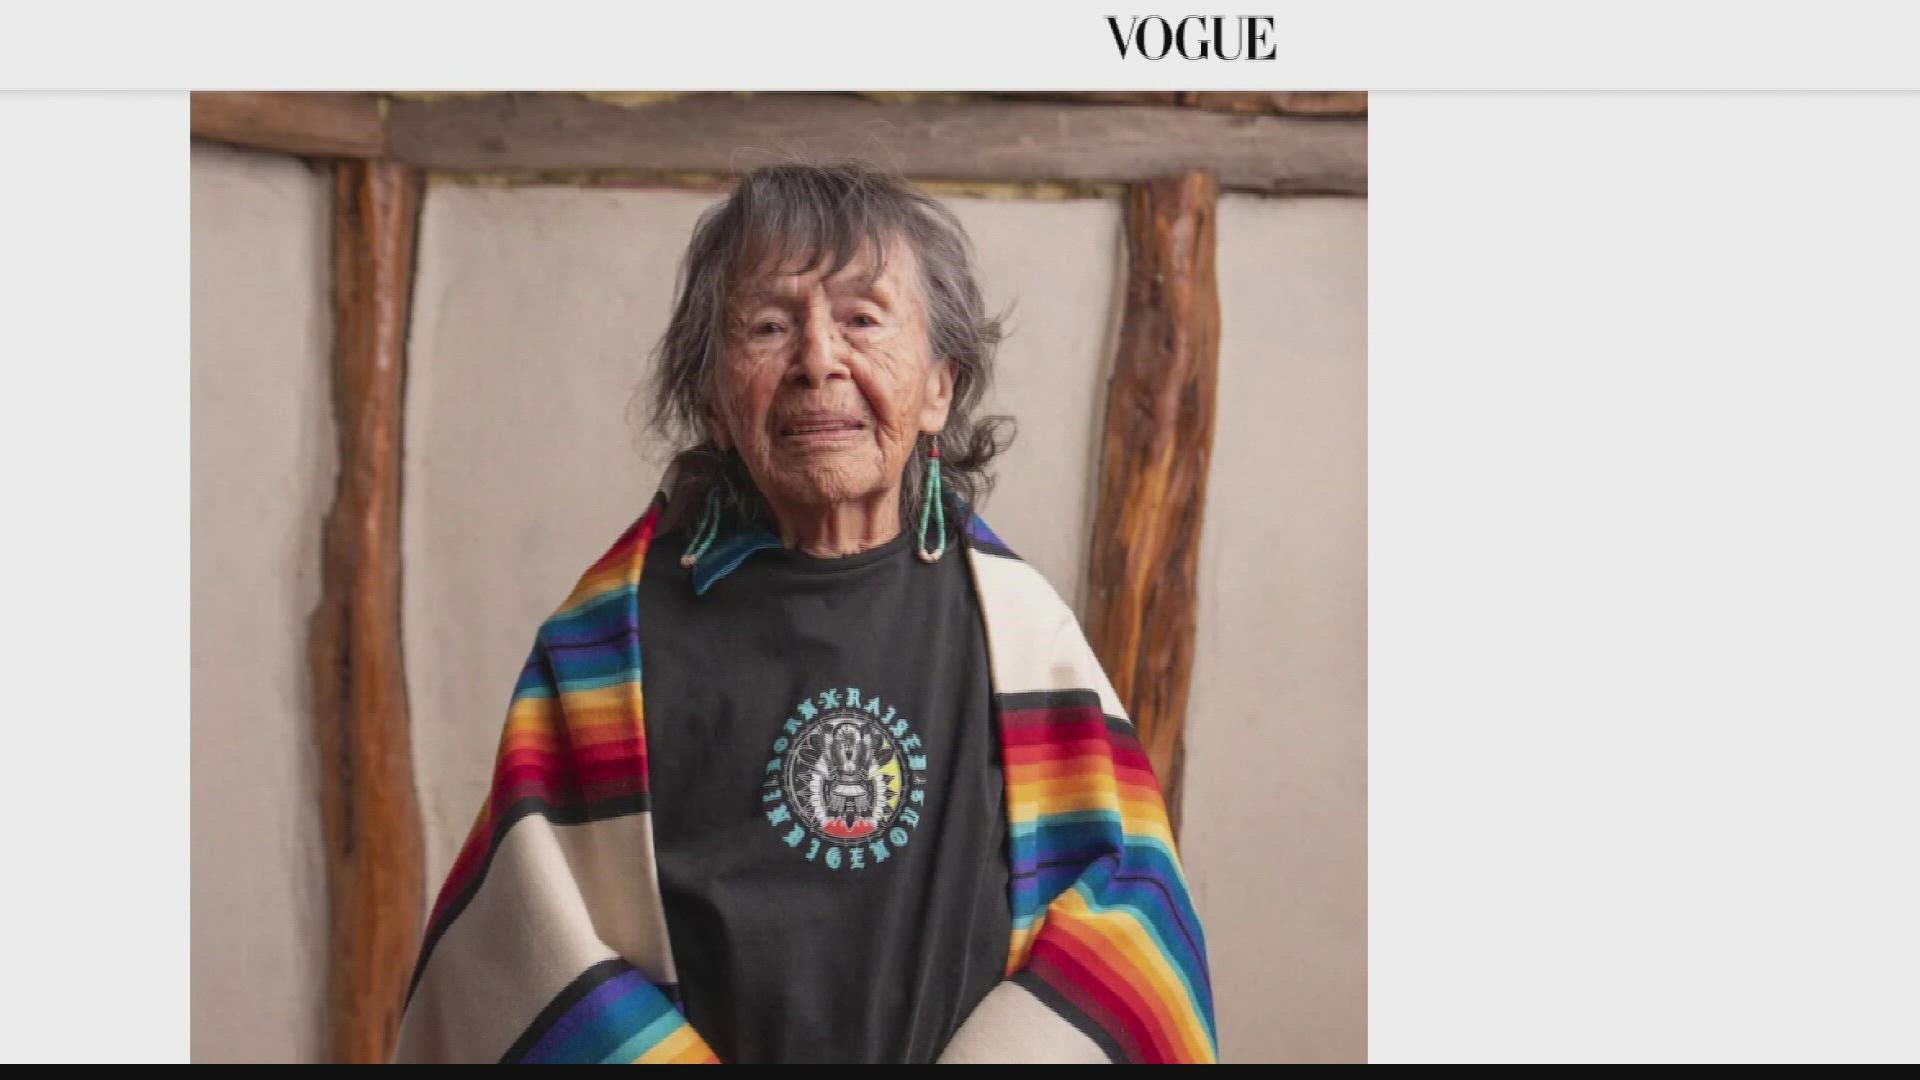 Native dance troupe Indigenous Enterprise has made it to the website of Vogue with a clothing collaboration.